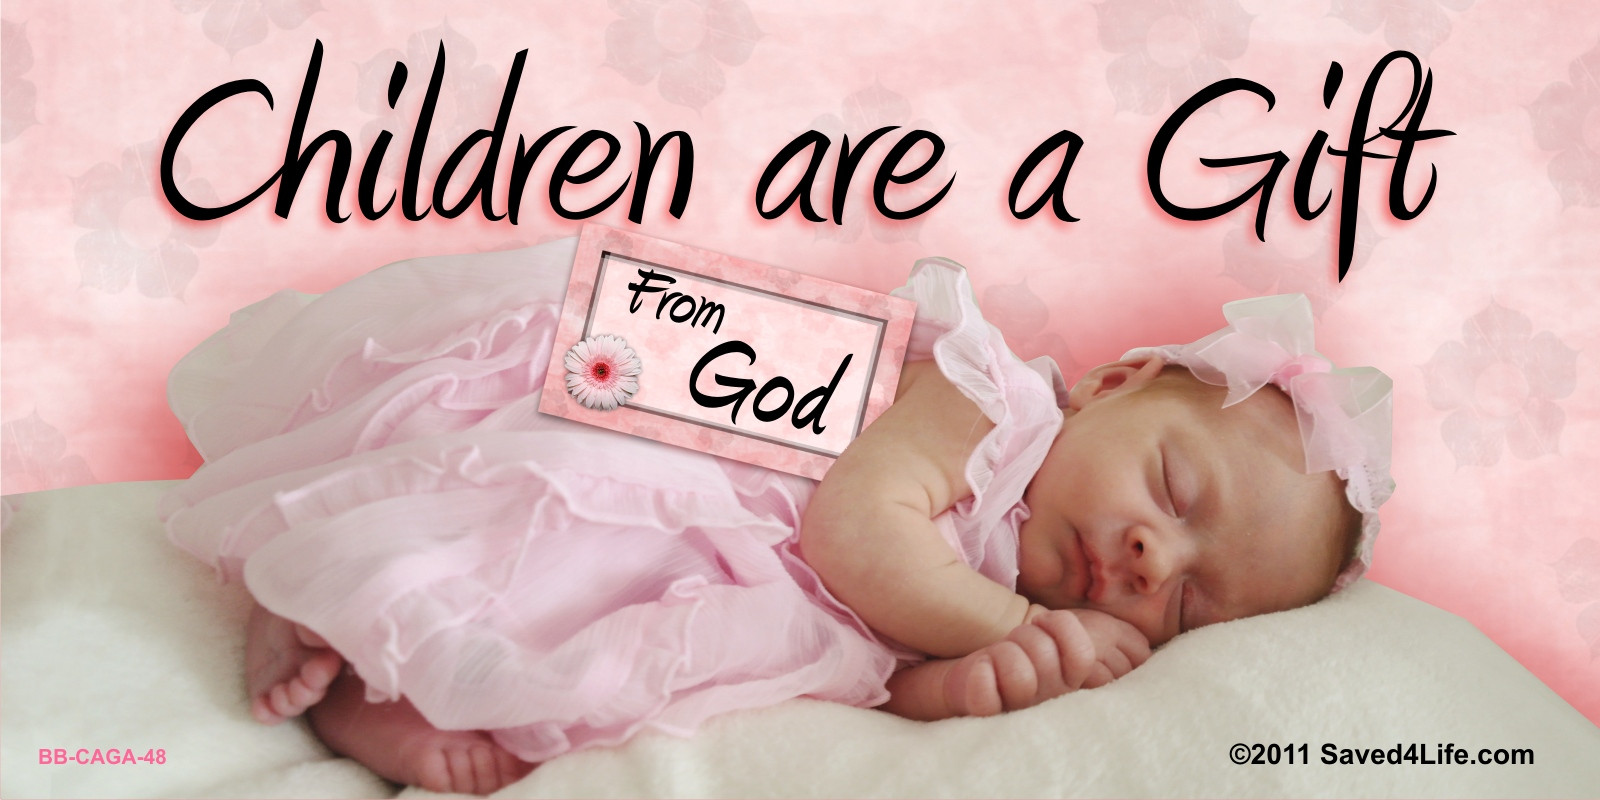 Children Are Gifts From God
 Just saw a gem of a bumper sticker childfree